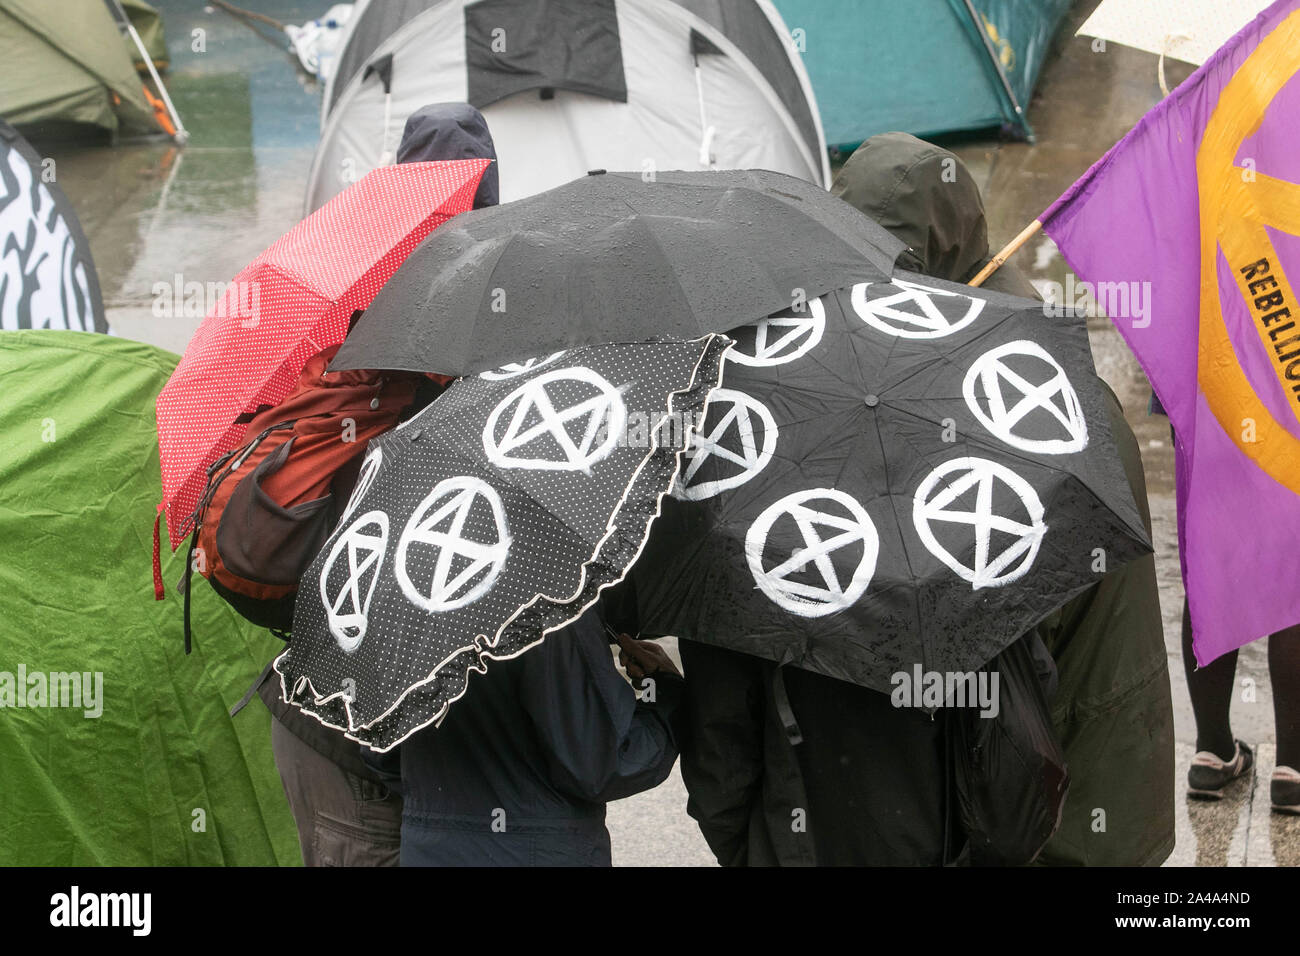 London, UK - 13 October 2019. Climate activists shelter under umbrellas with the Extinction rebellion symbol as they continue their protest for a seventh day while camping  out in Trafalgar Square in an attempt to force the government to declare a climate emergency and meet their demands to reduce to zero carbon emmissions by 2025. Credit: amer ghazzal/Alamy Live News Stock Photo